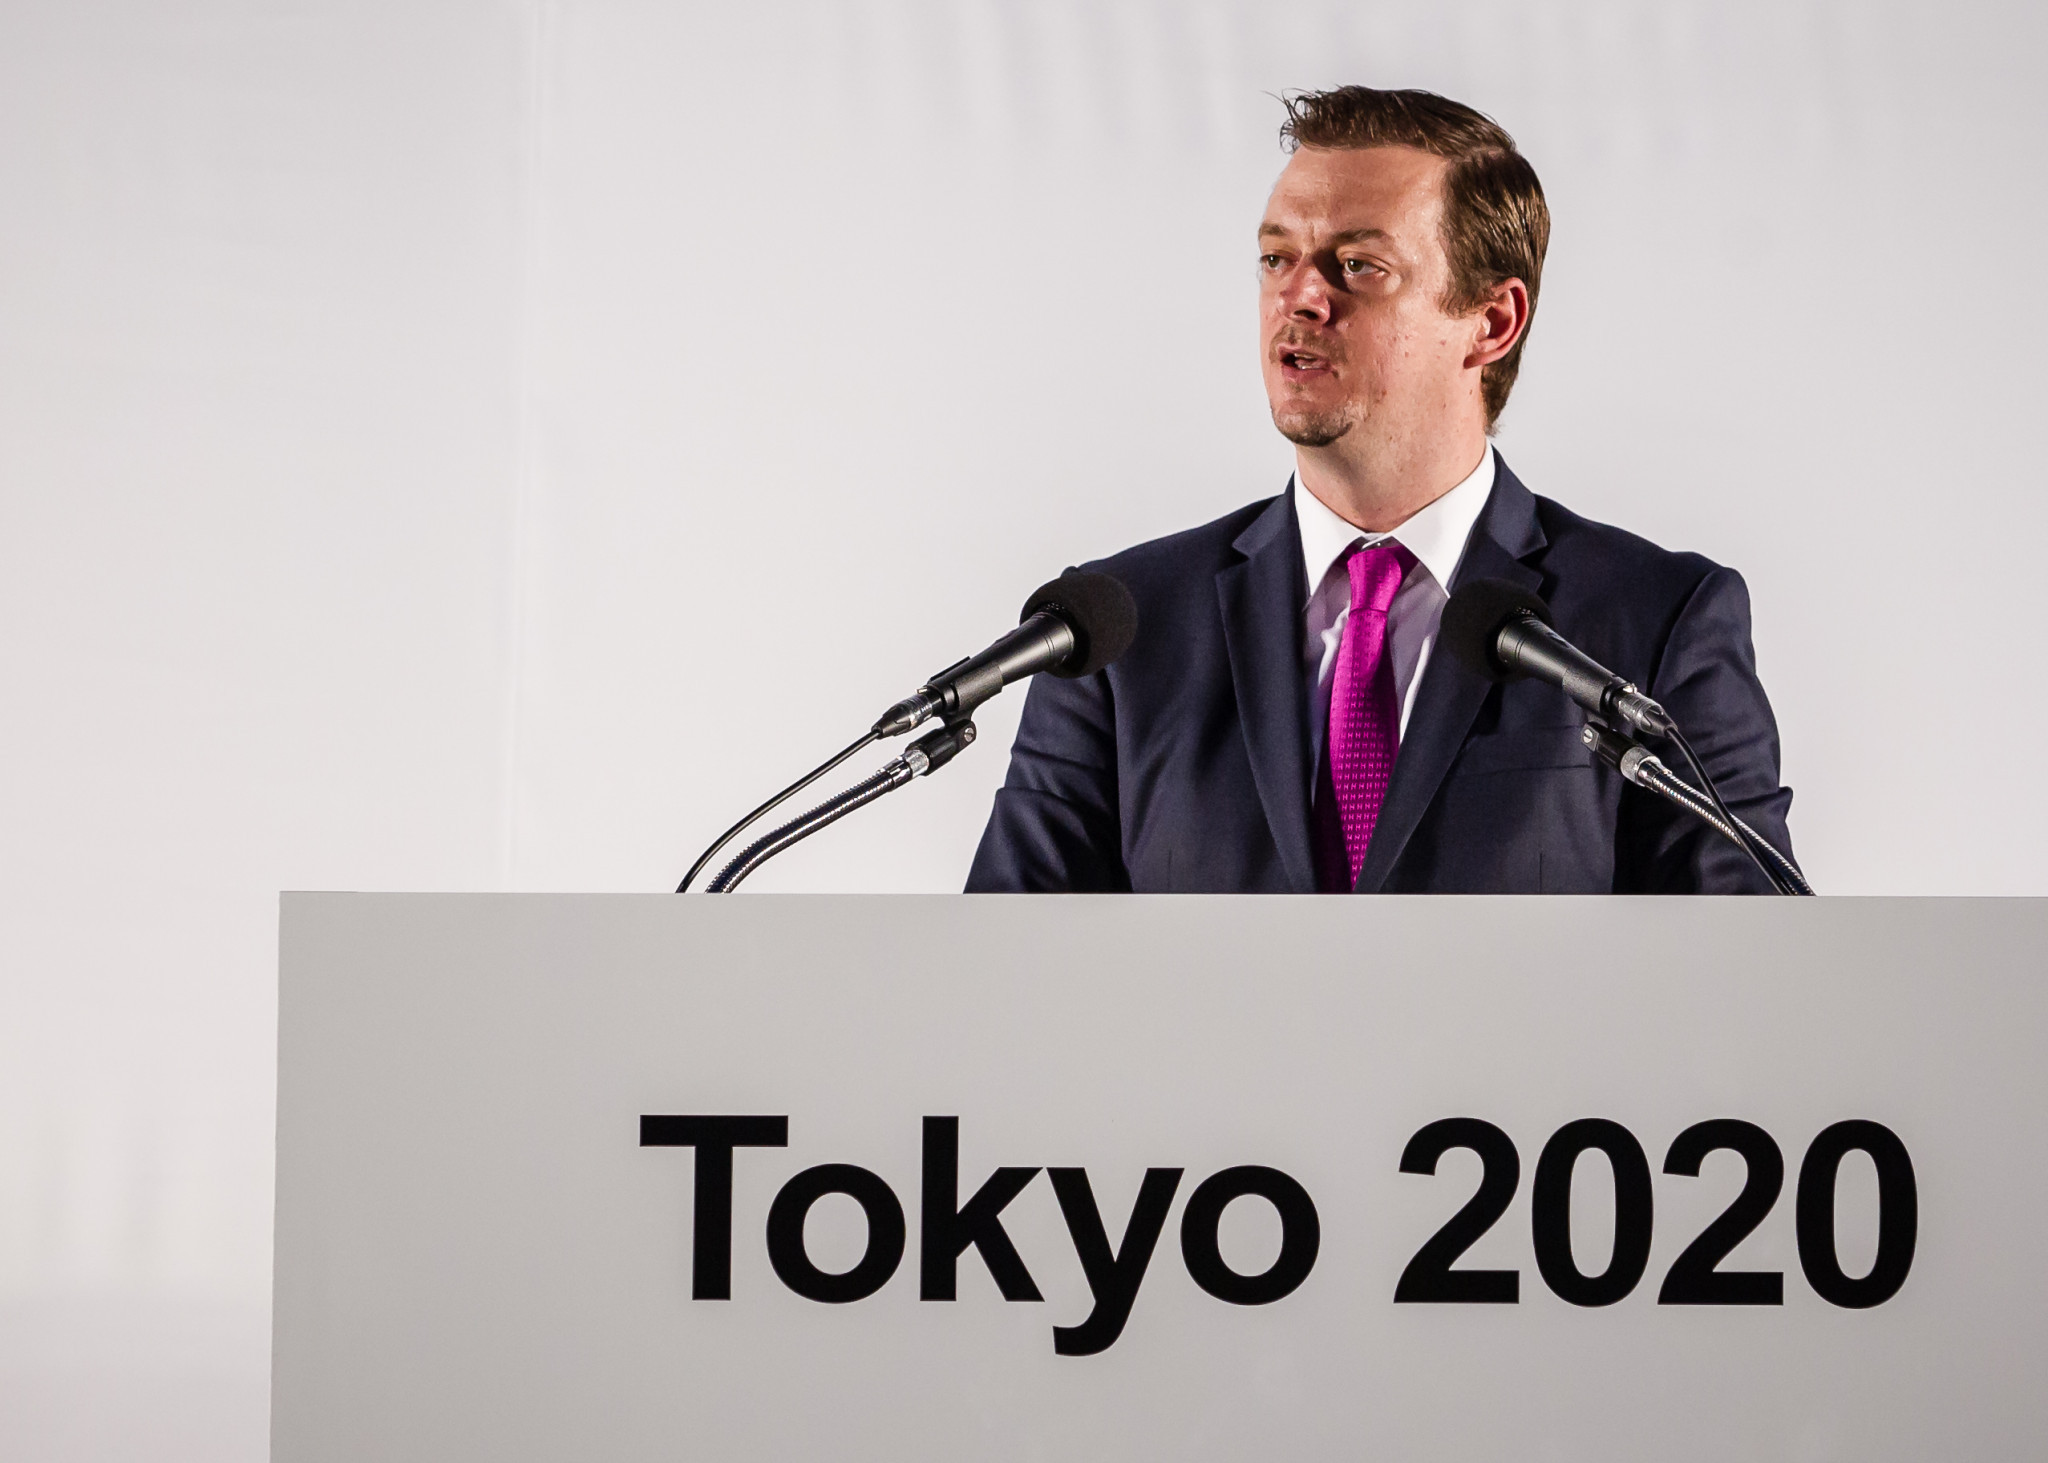 International Paralympic Committee President Andrew Parsons has predicted that Tokyo 2020 will be a sell-out ©Getty Images